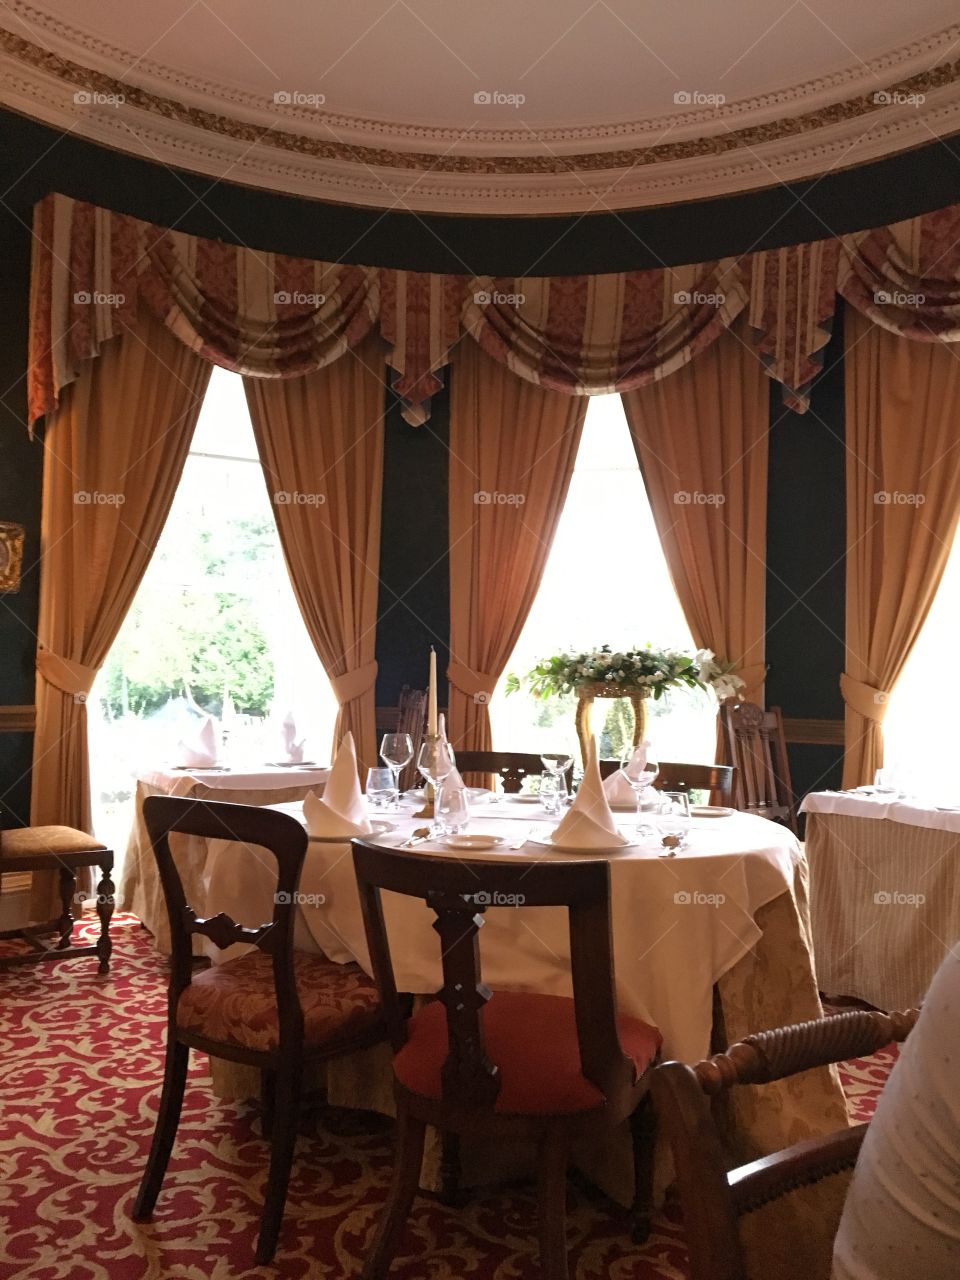 A Castle’s dining room